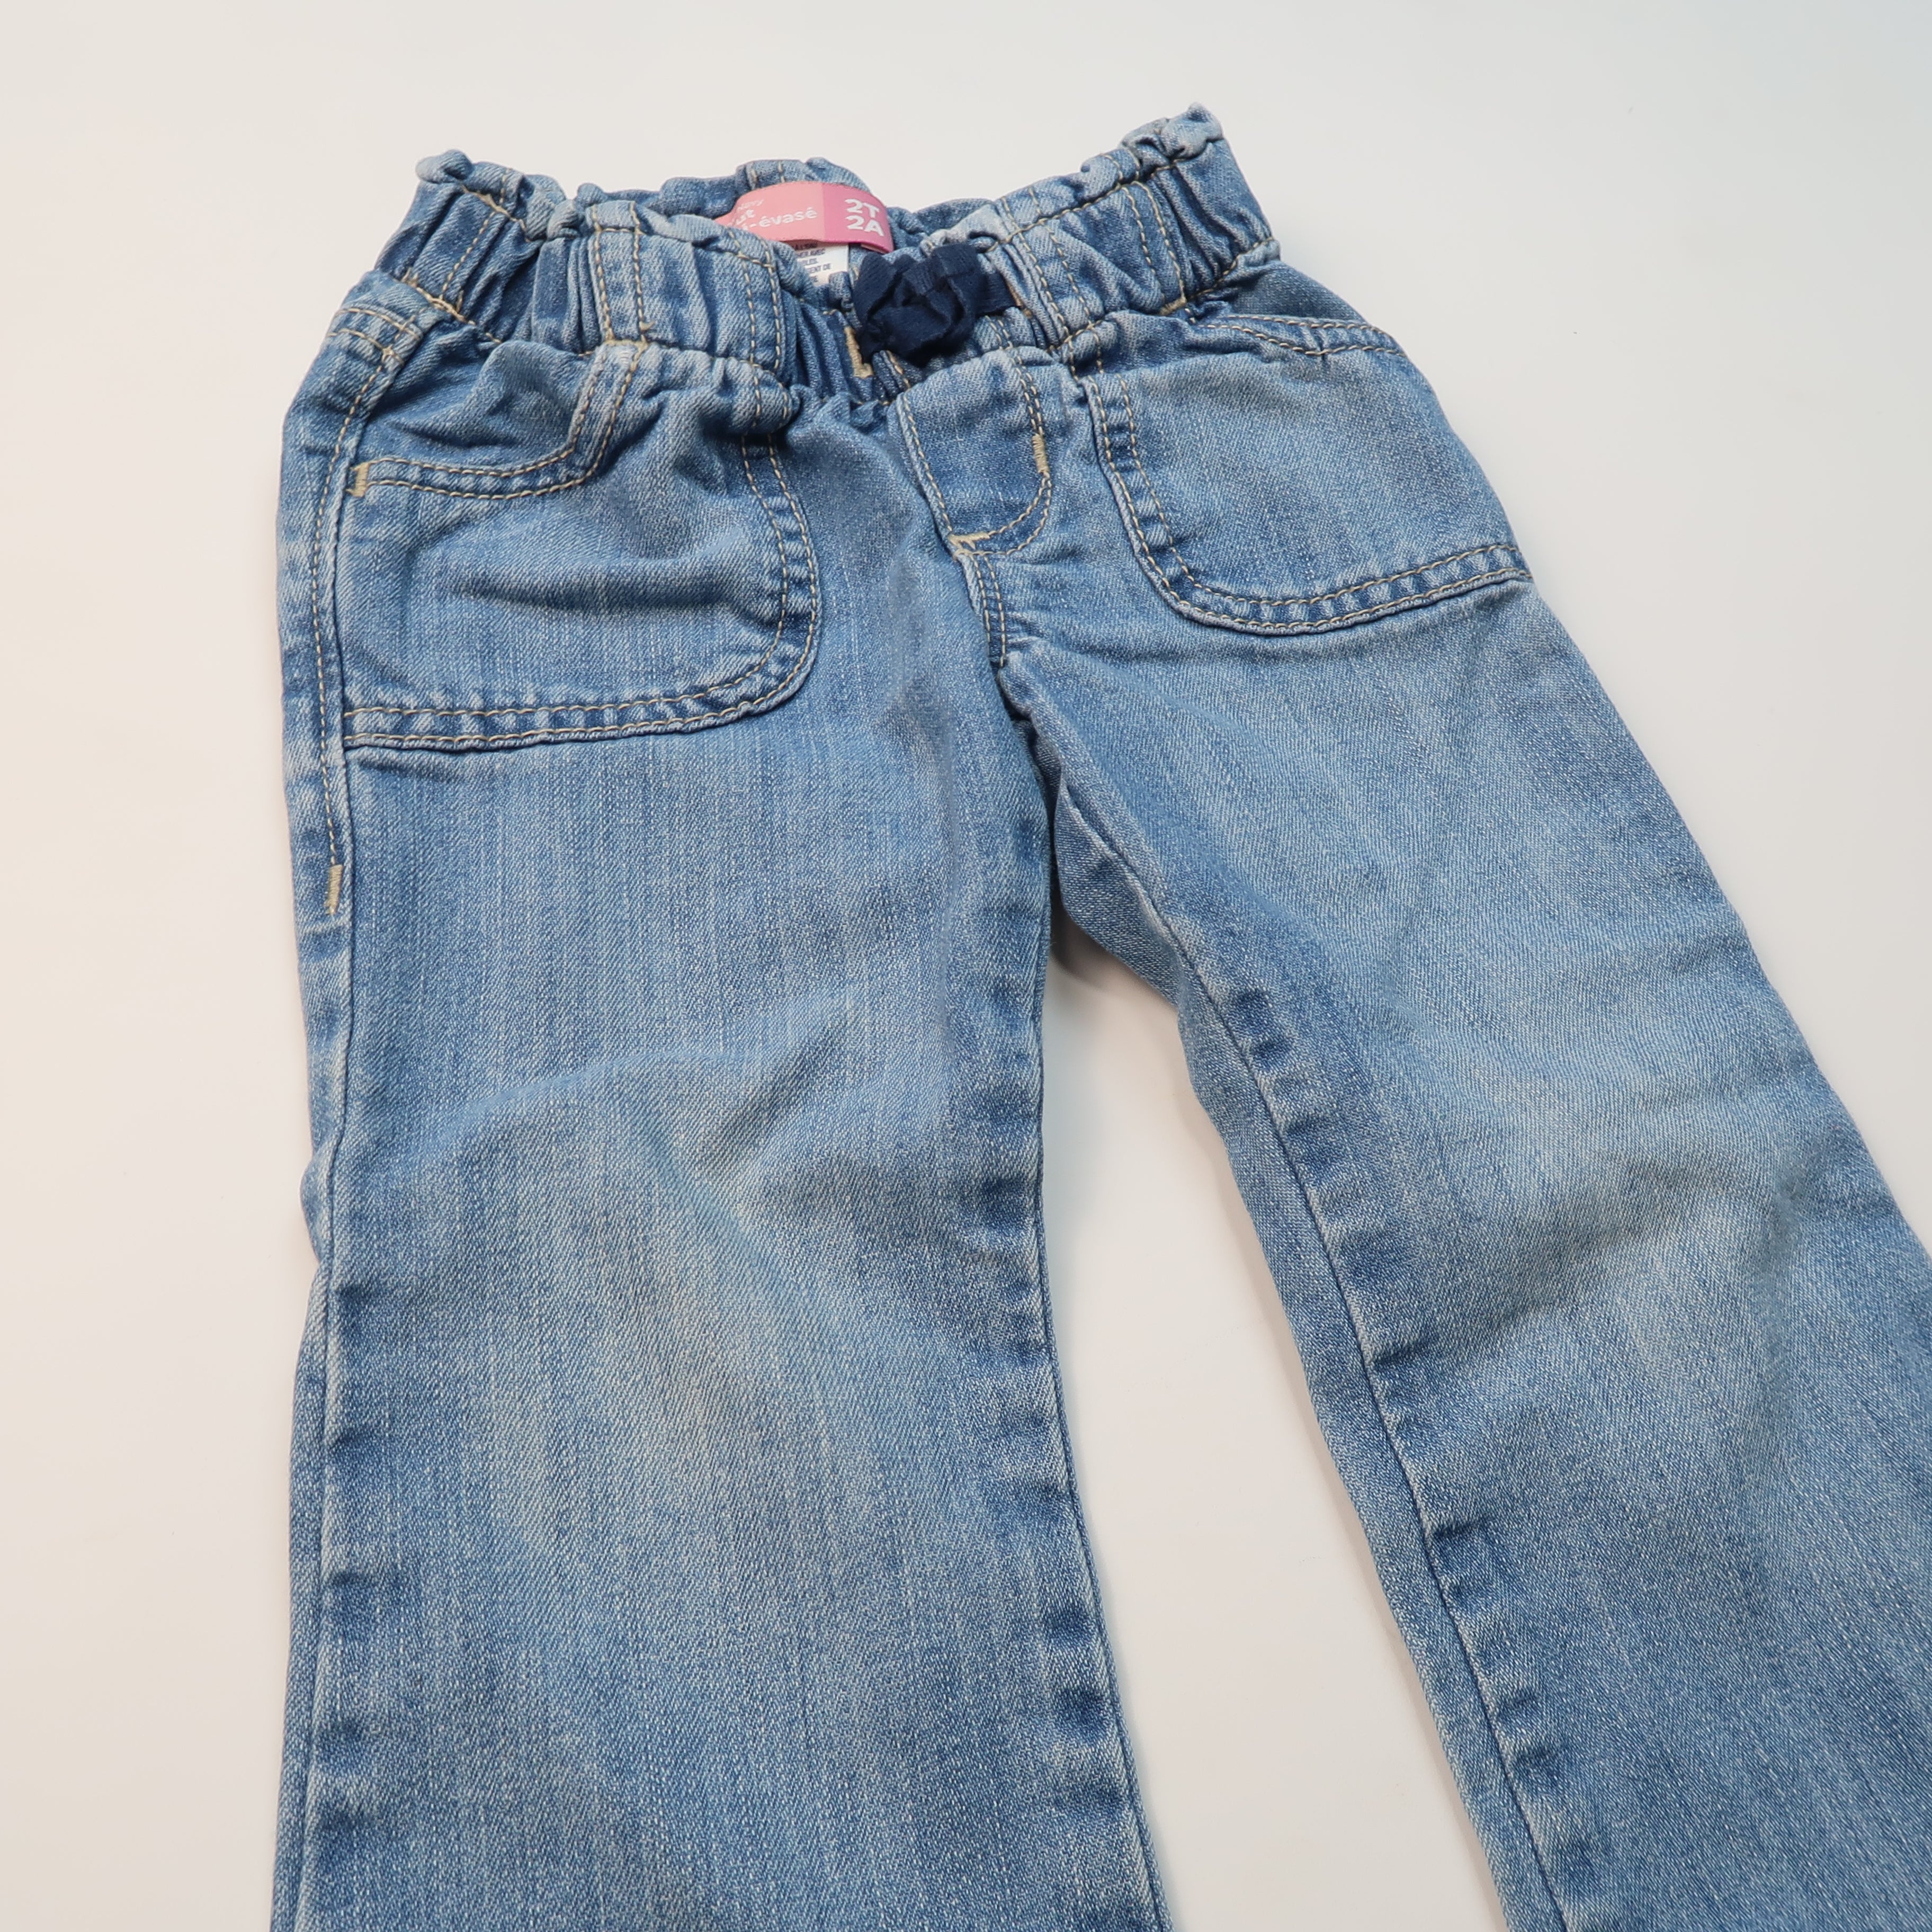 Old Navy - Pants (2T)